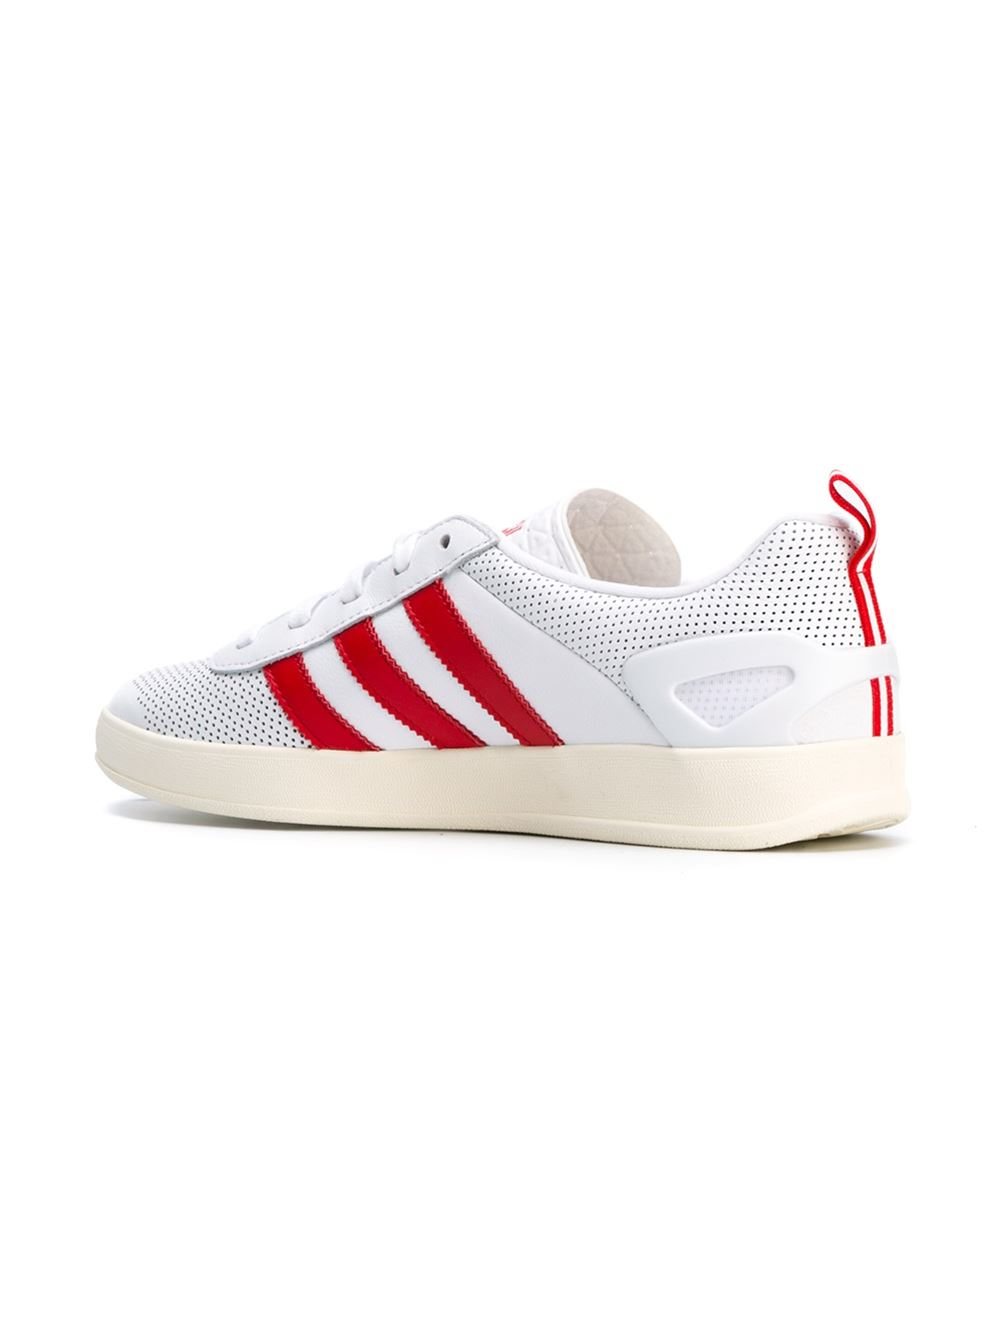 adidas Originals Adidas X Palace 'palace Pro' Sneakers in White - Lyst